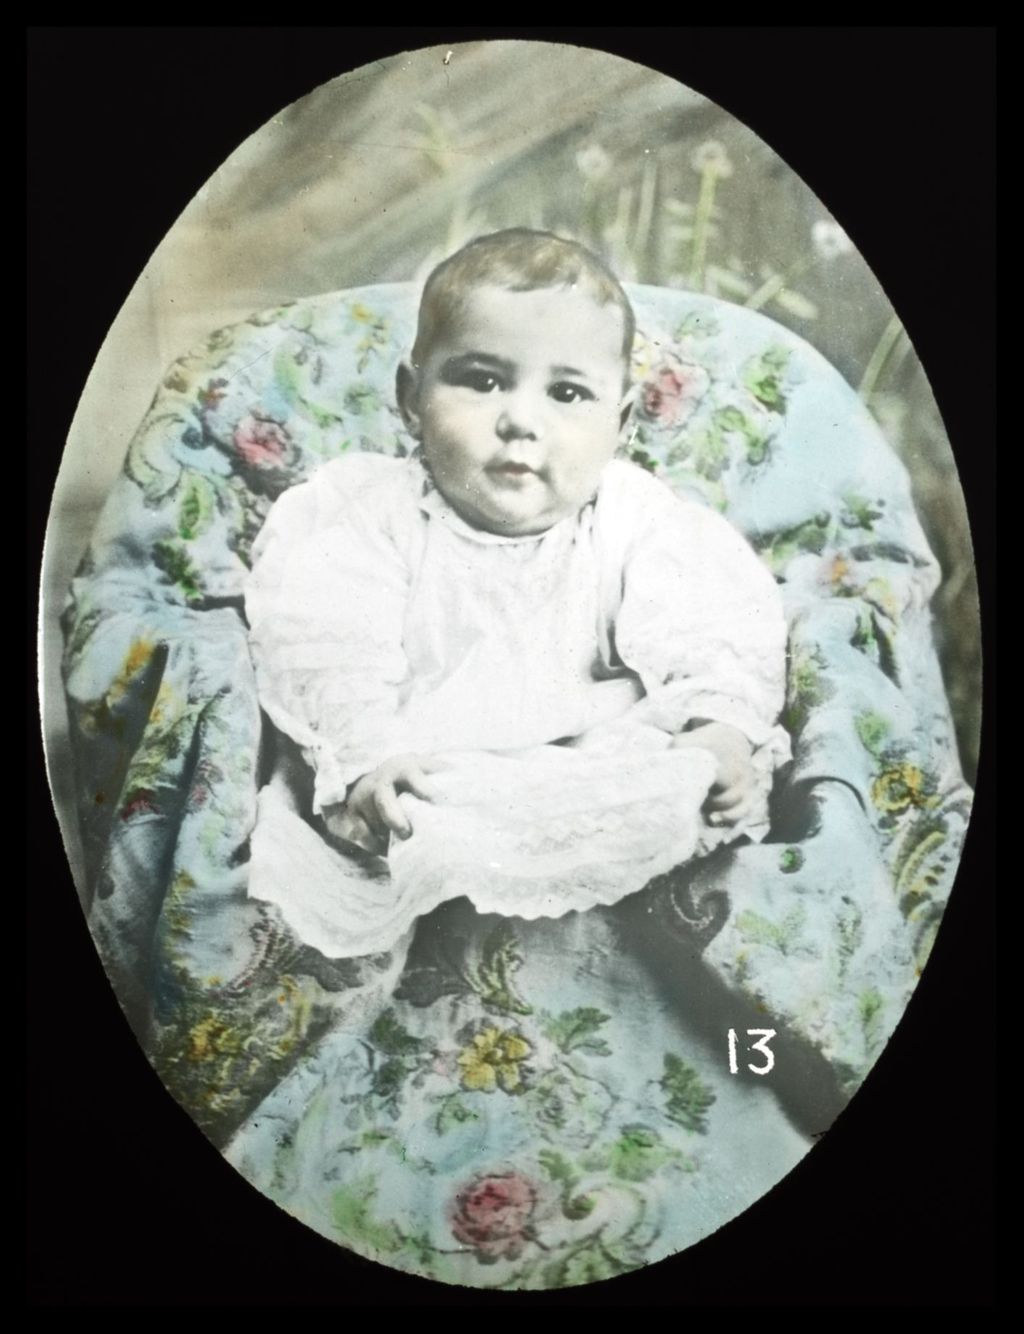 An unidentified baby